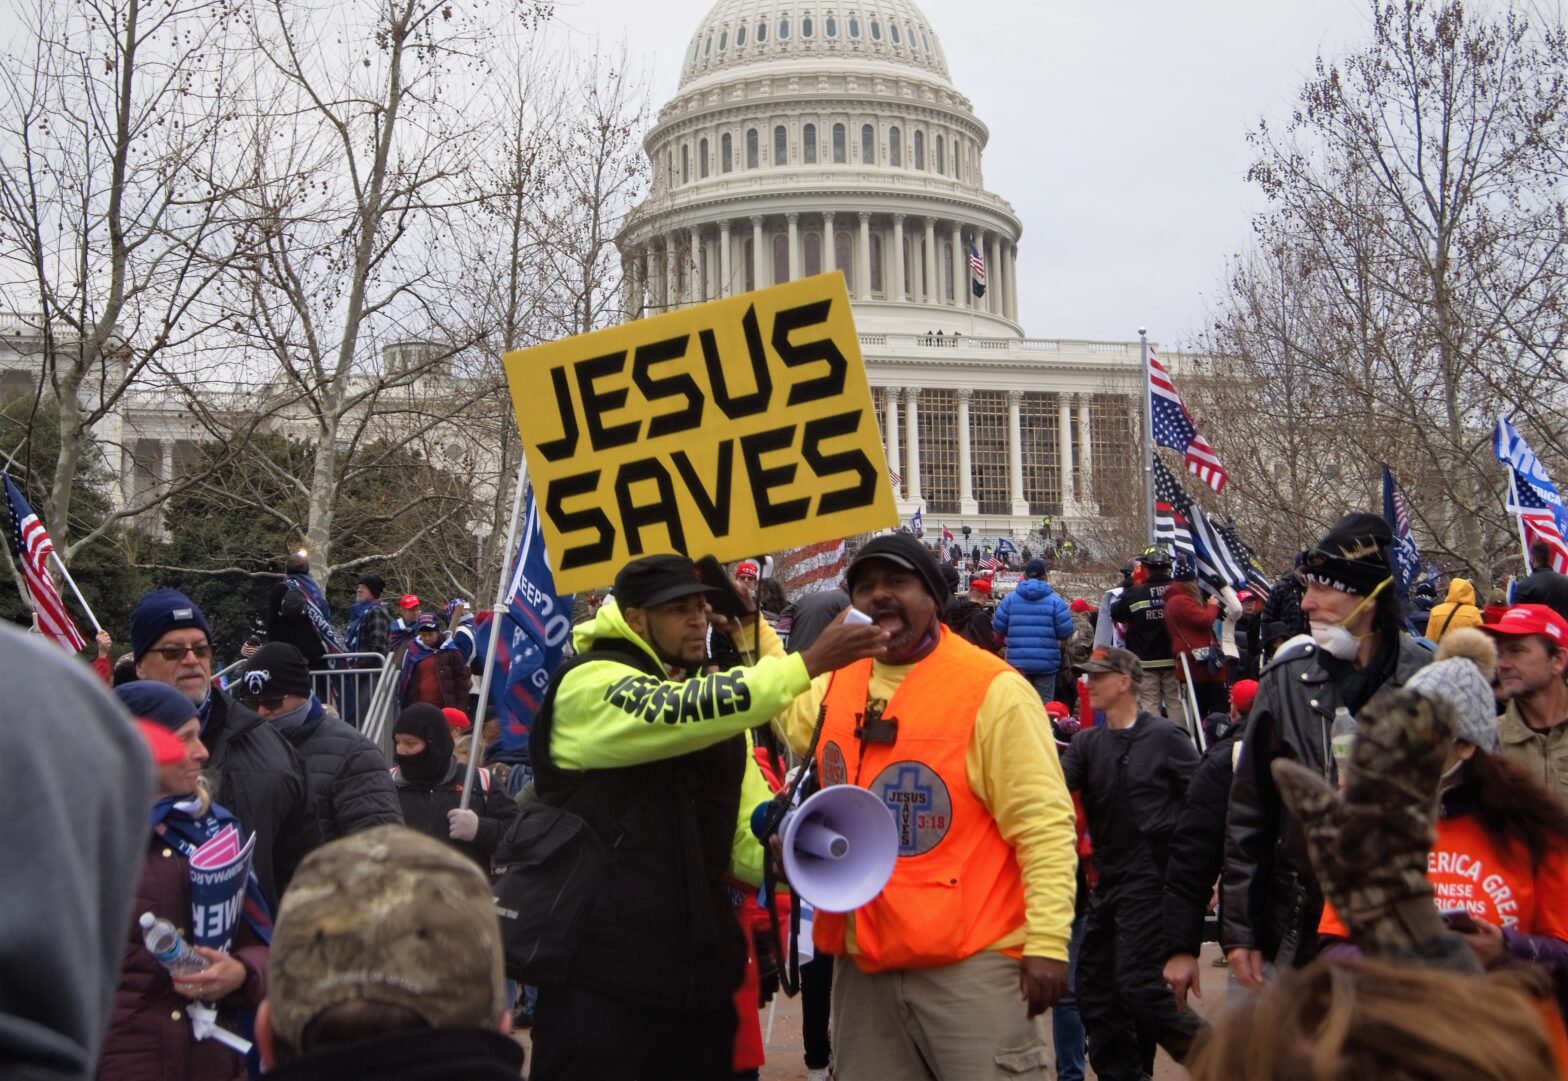 Jesus Saves sign at Capitol insurrection